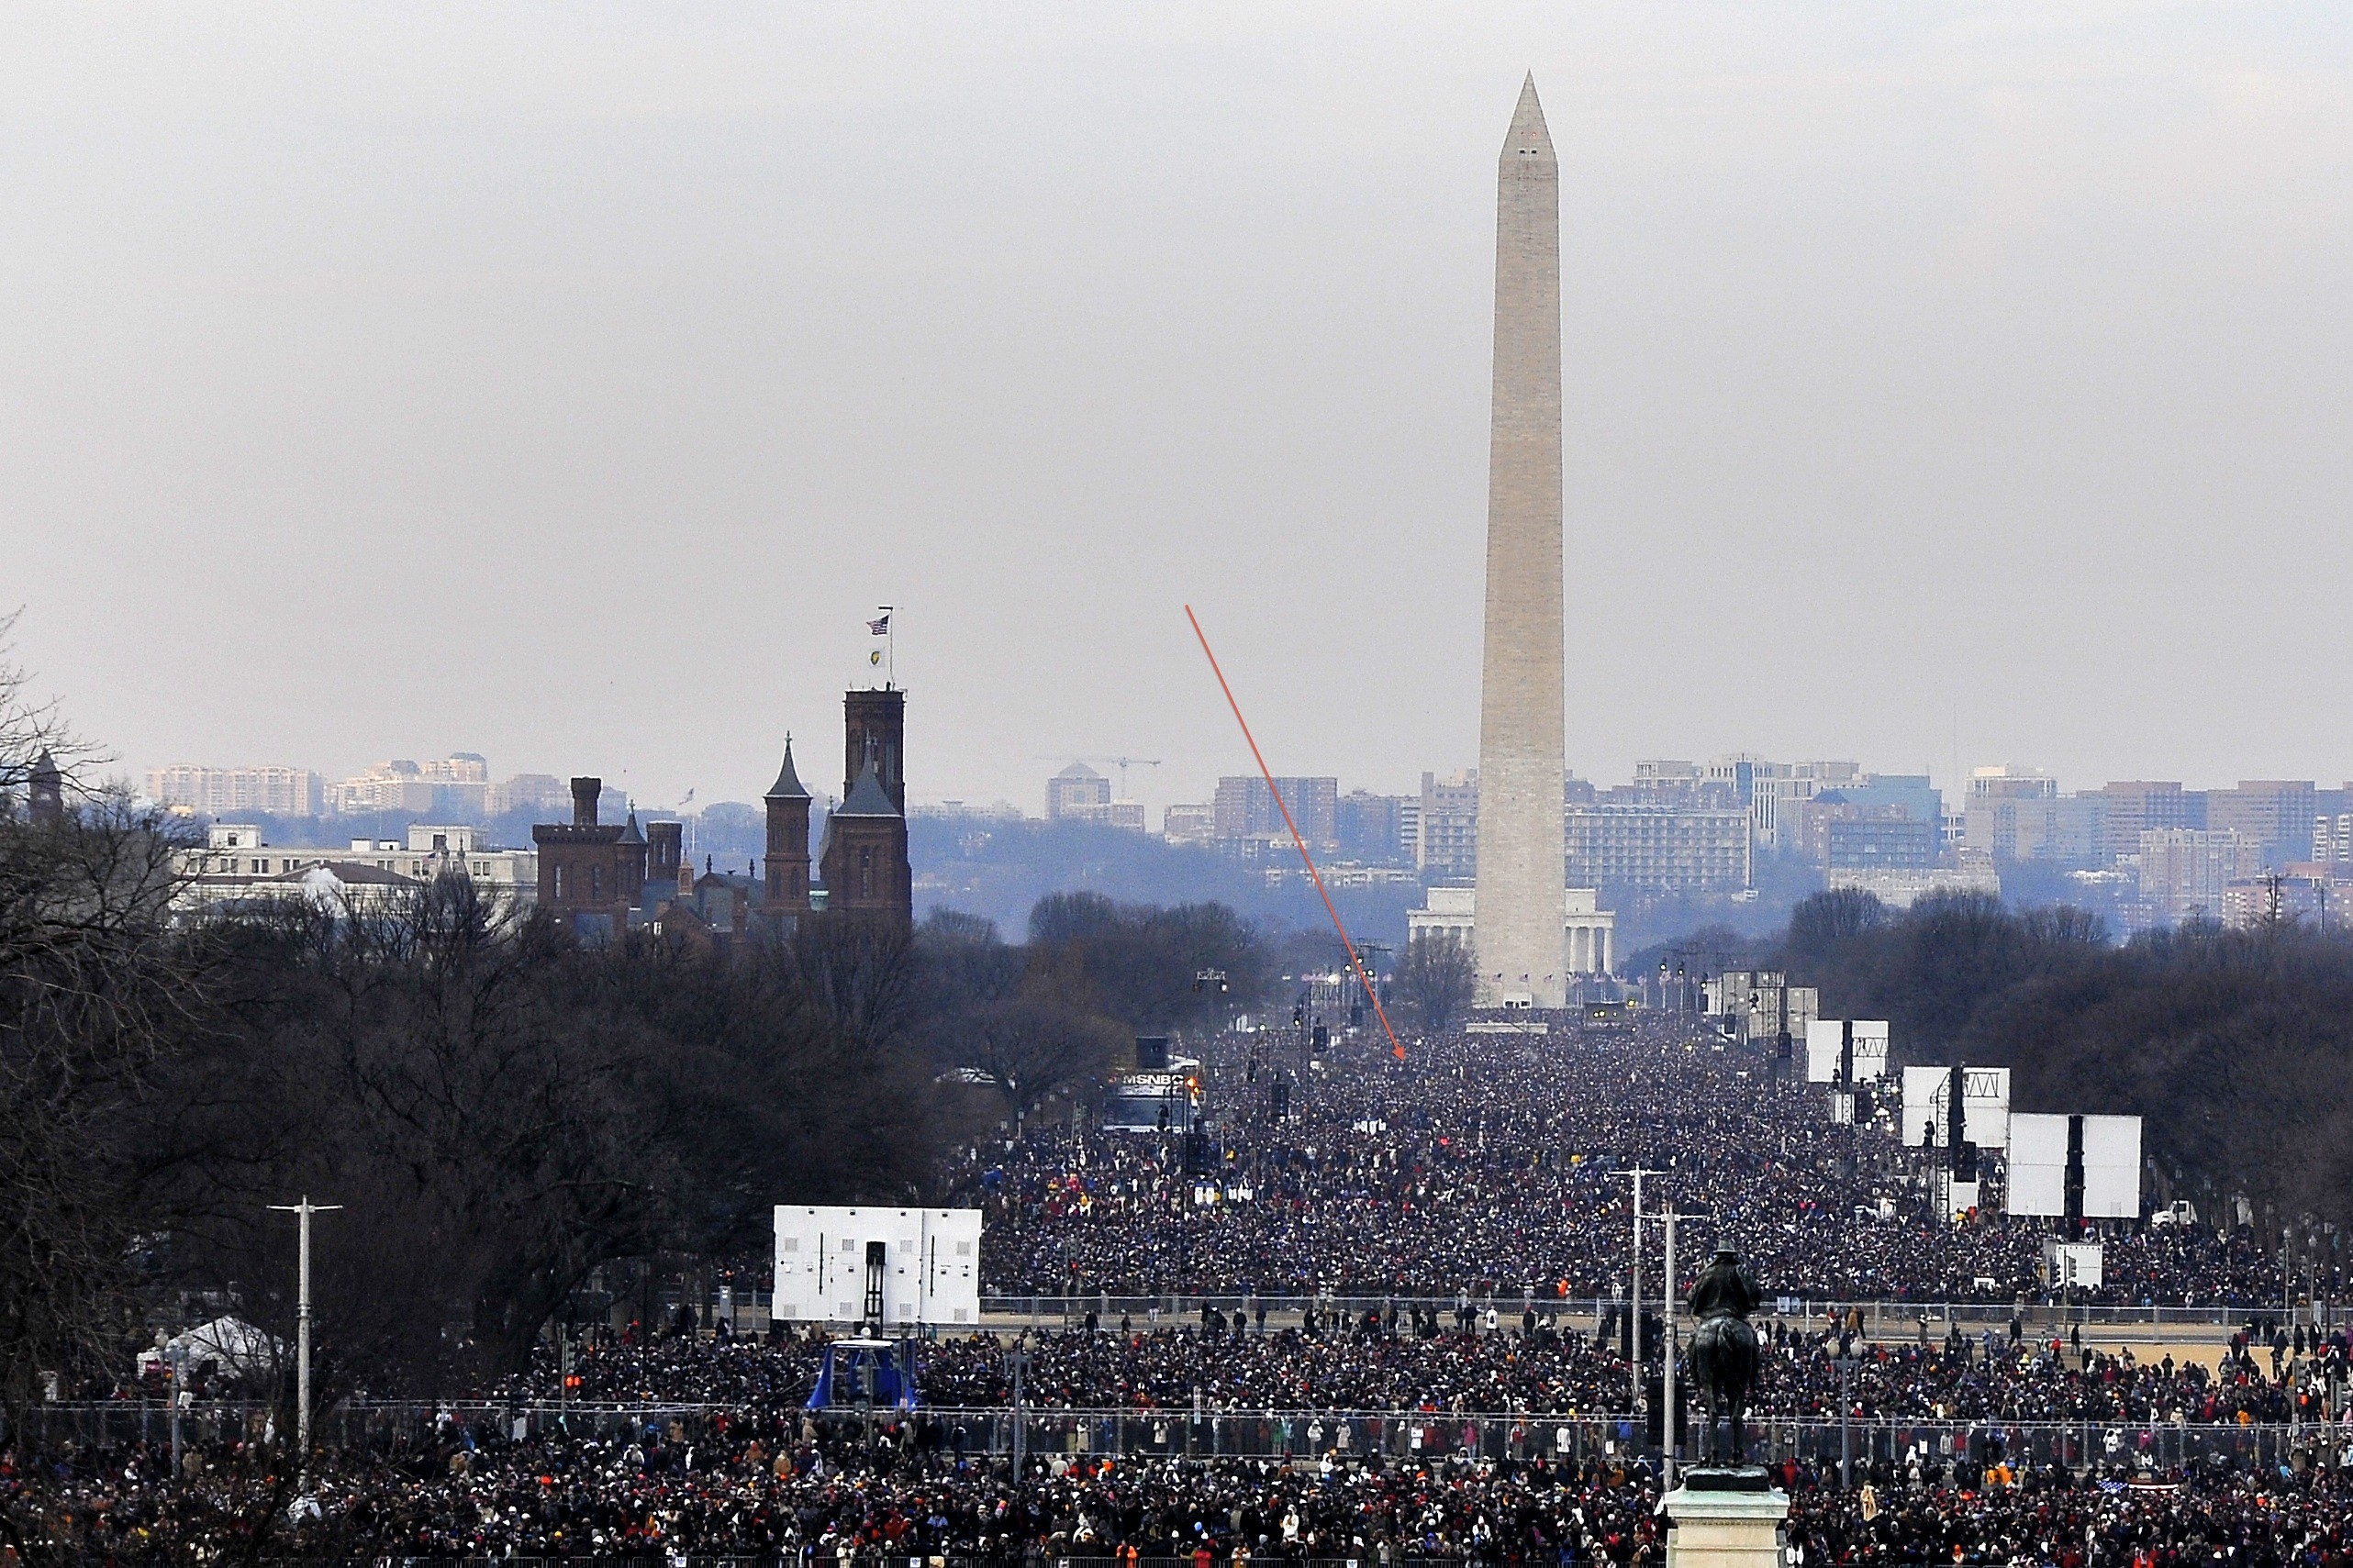 2564x1709 2009 Armed Forces Inaugural Committee. “